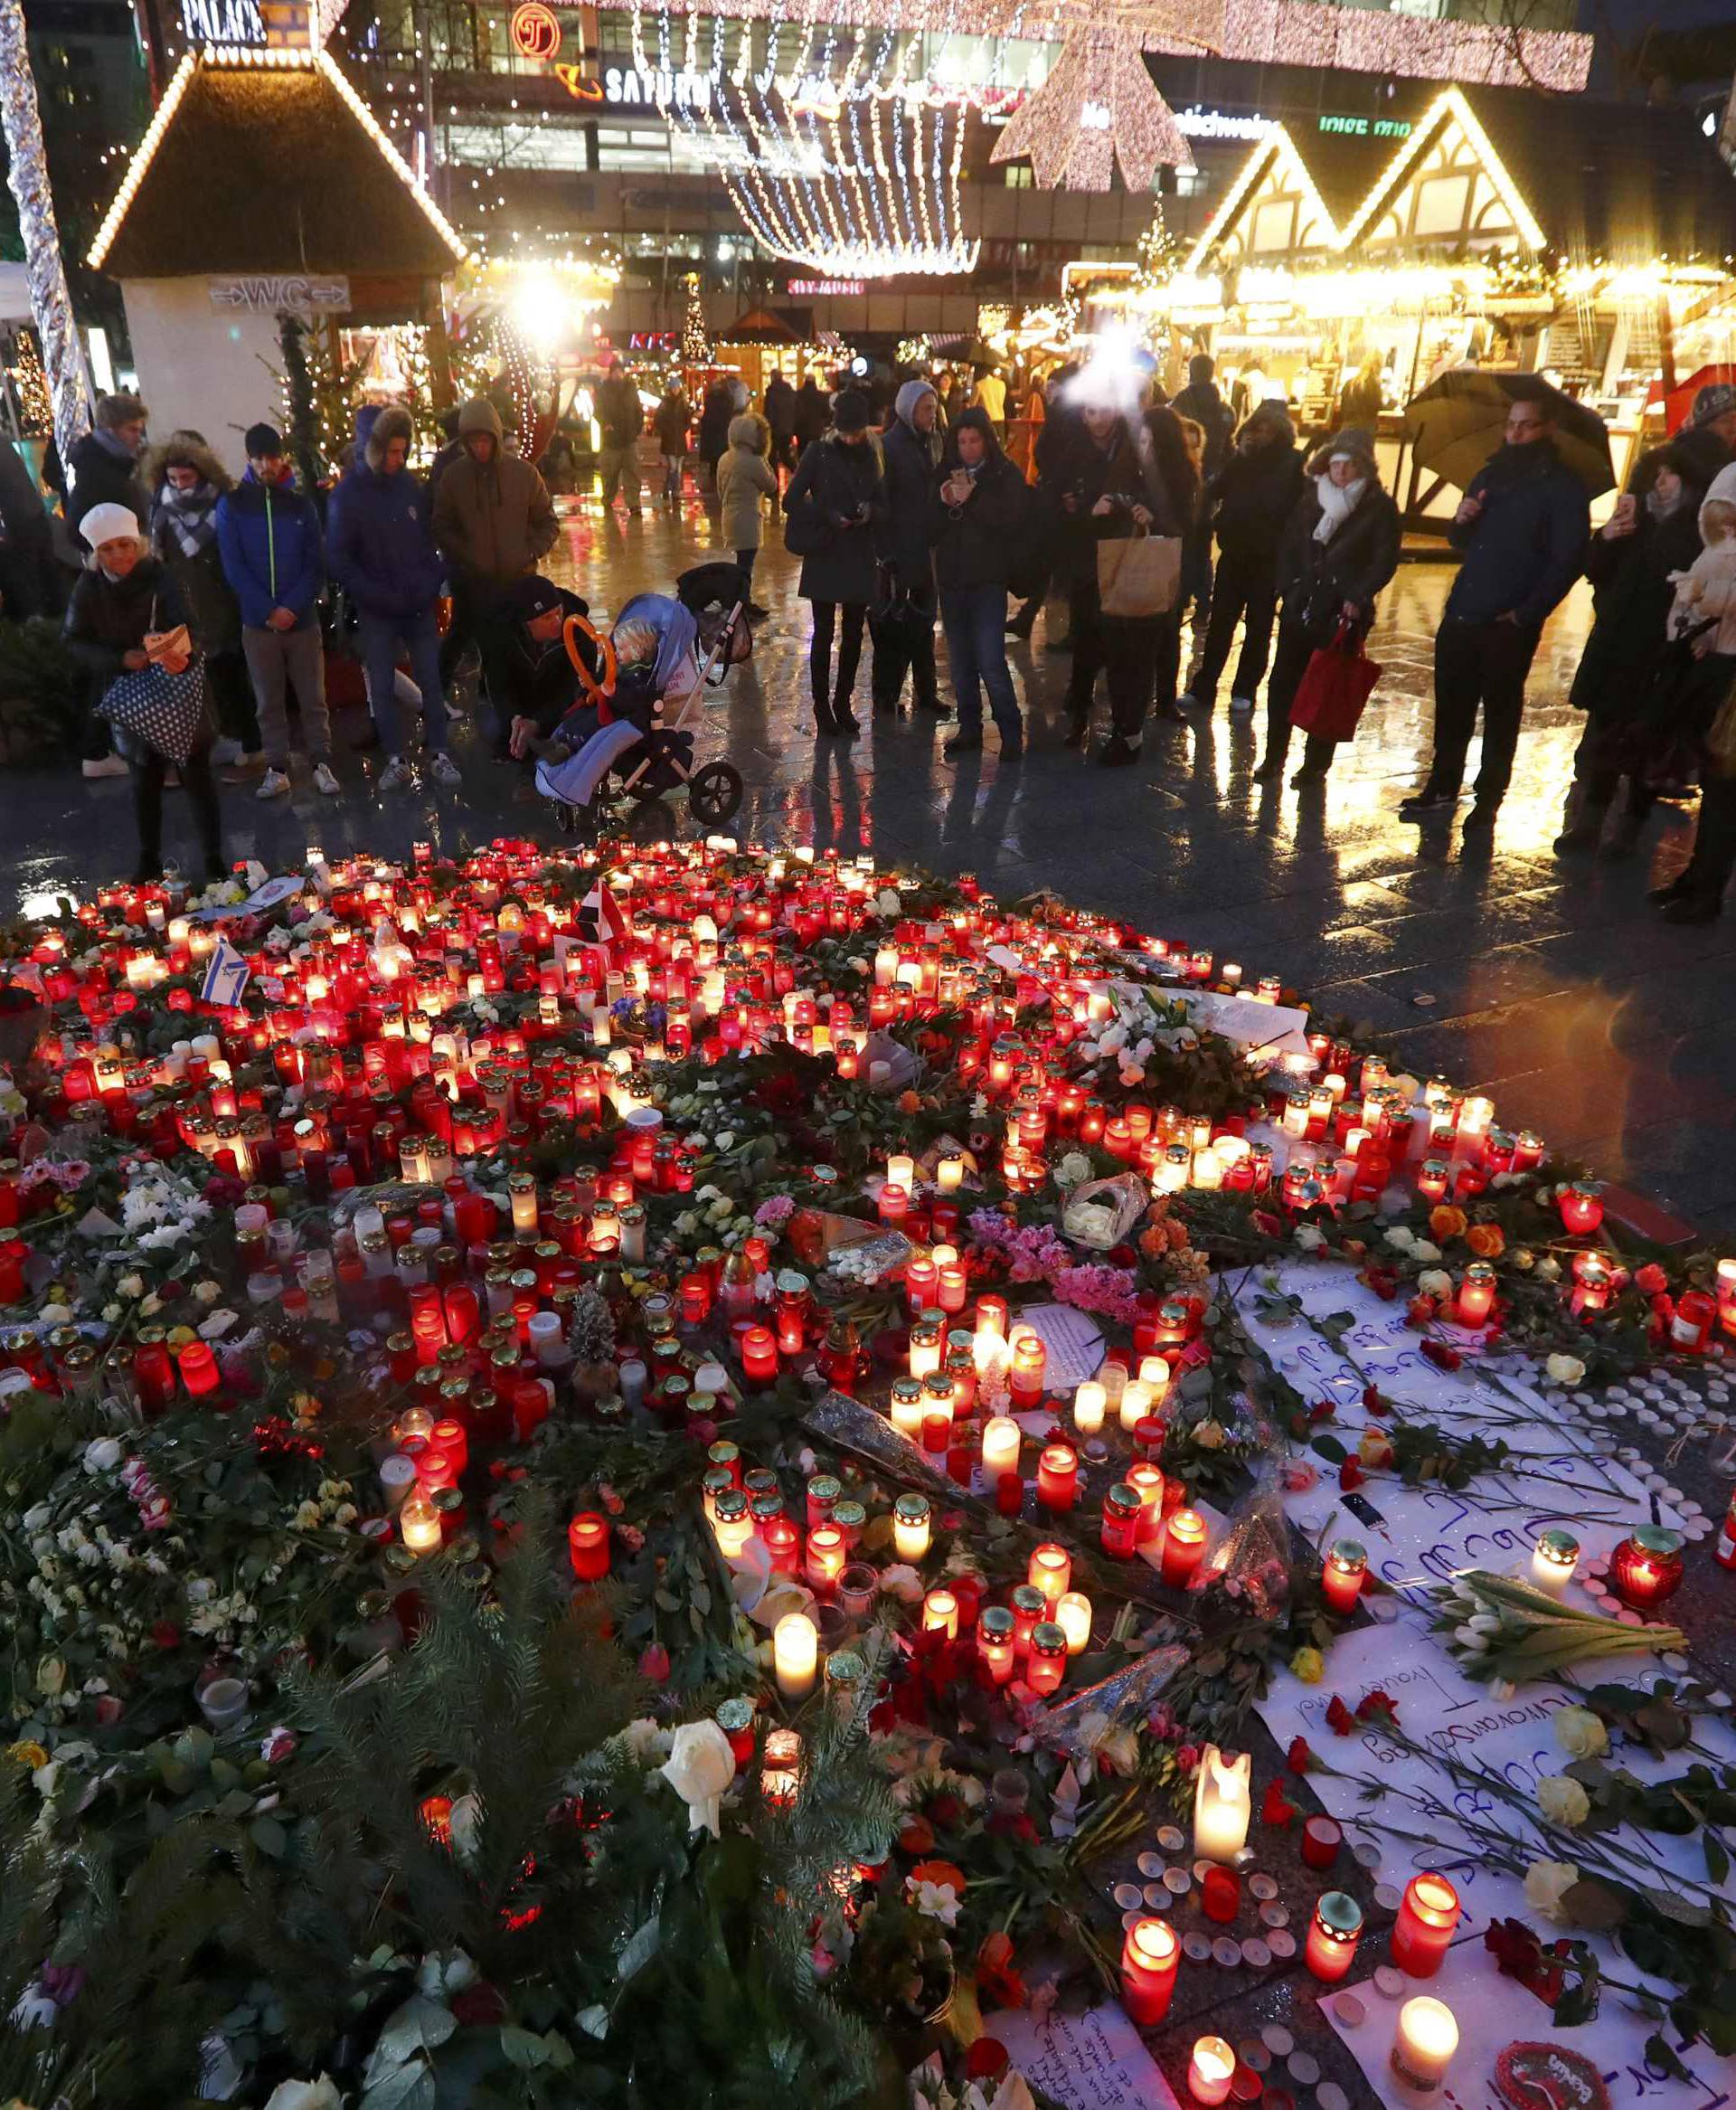 Flowers and candles are placed at the Christmas market at Breitscheid square in Berlin